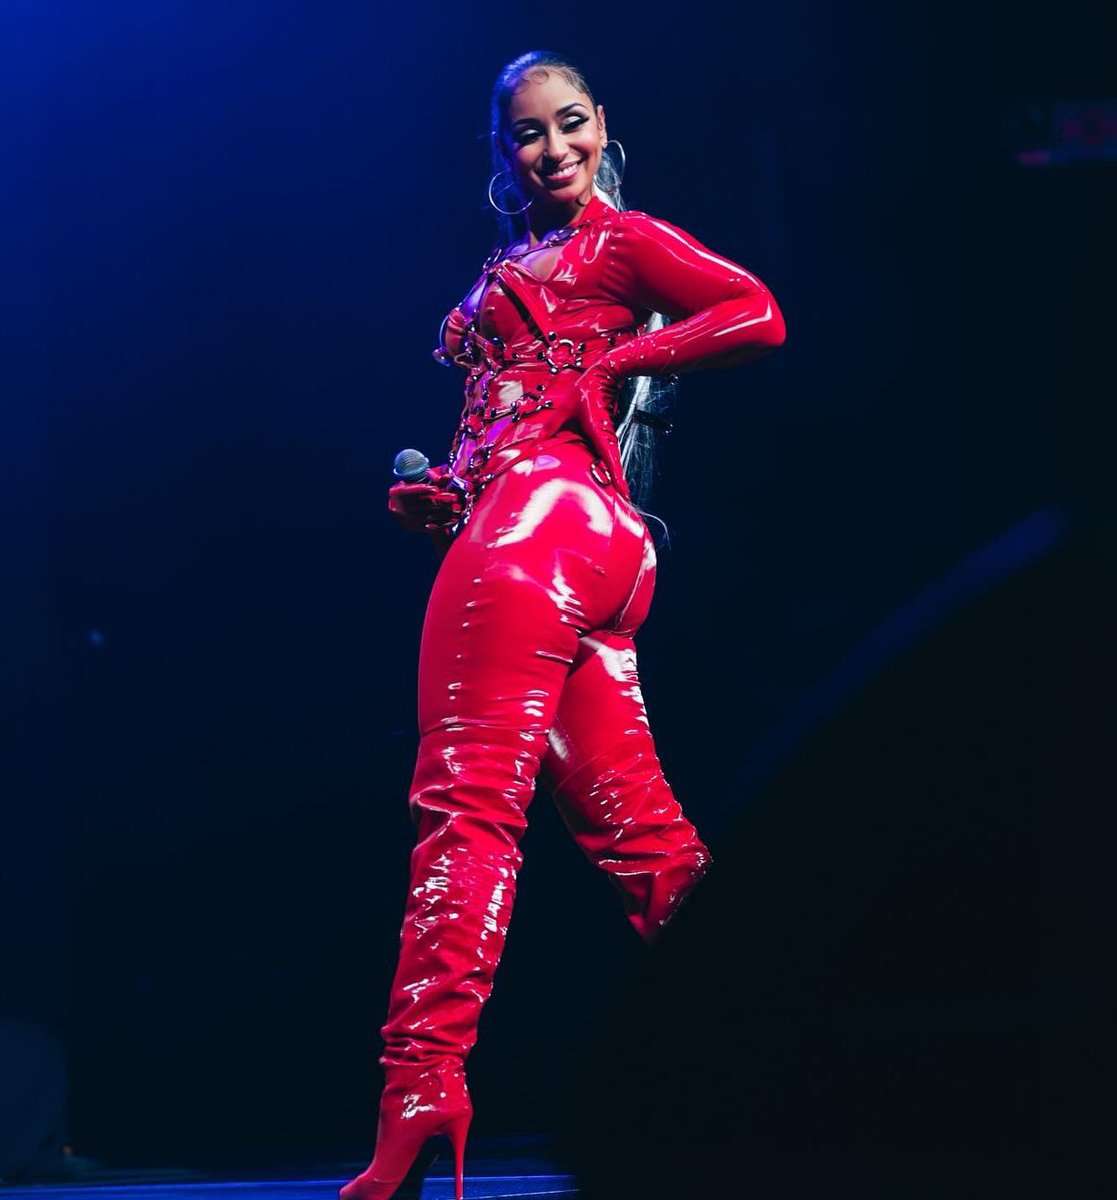 Mya at age 44 living her best life ❤️